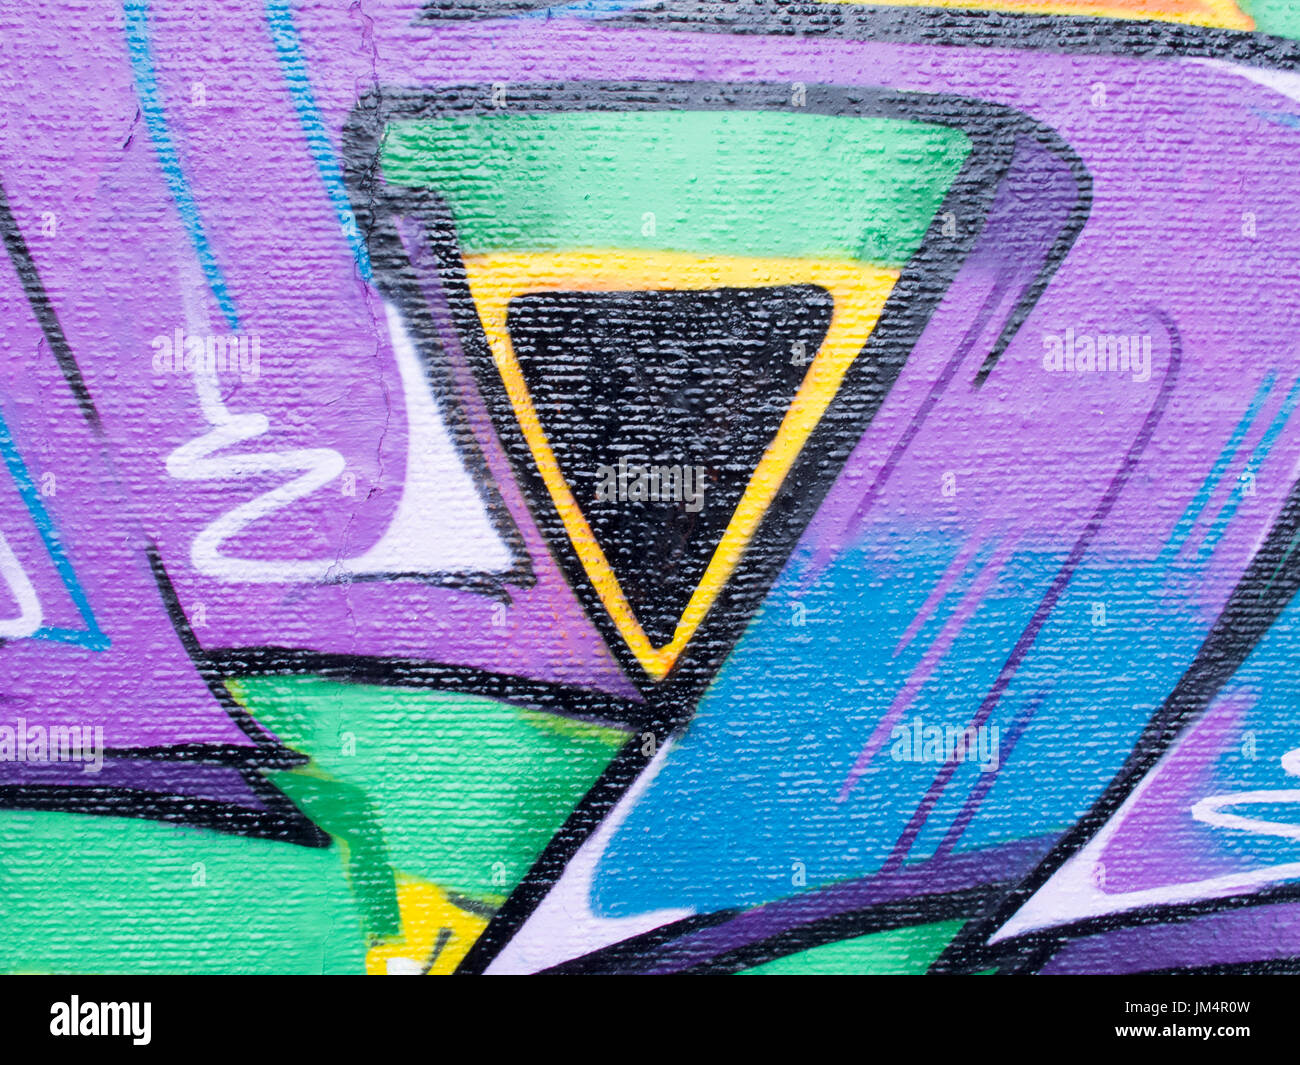 Details of grafiti with vivid colors on wall. Useful for backgrounds, backdrops and concept work. Stock Photo